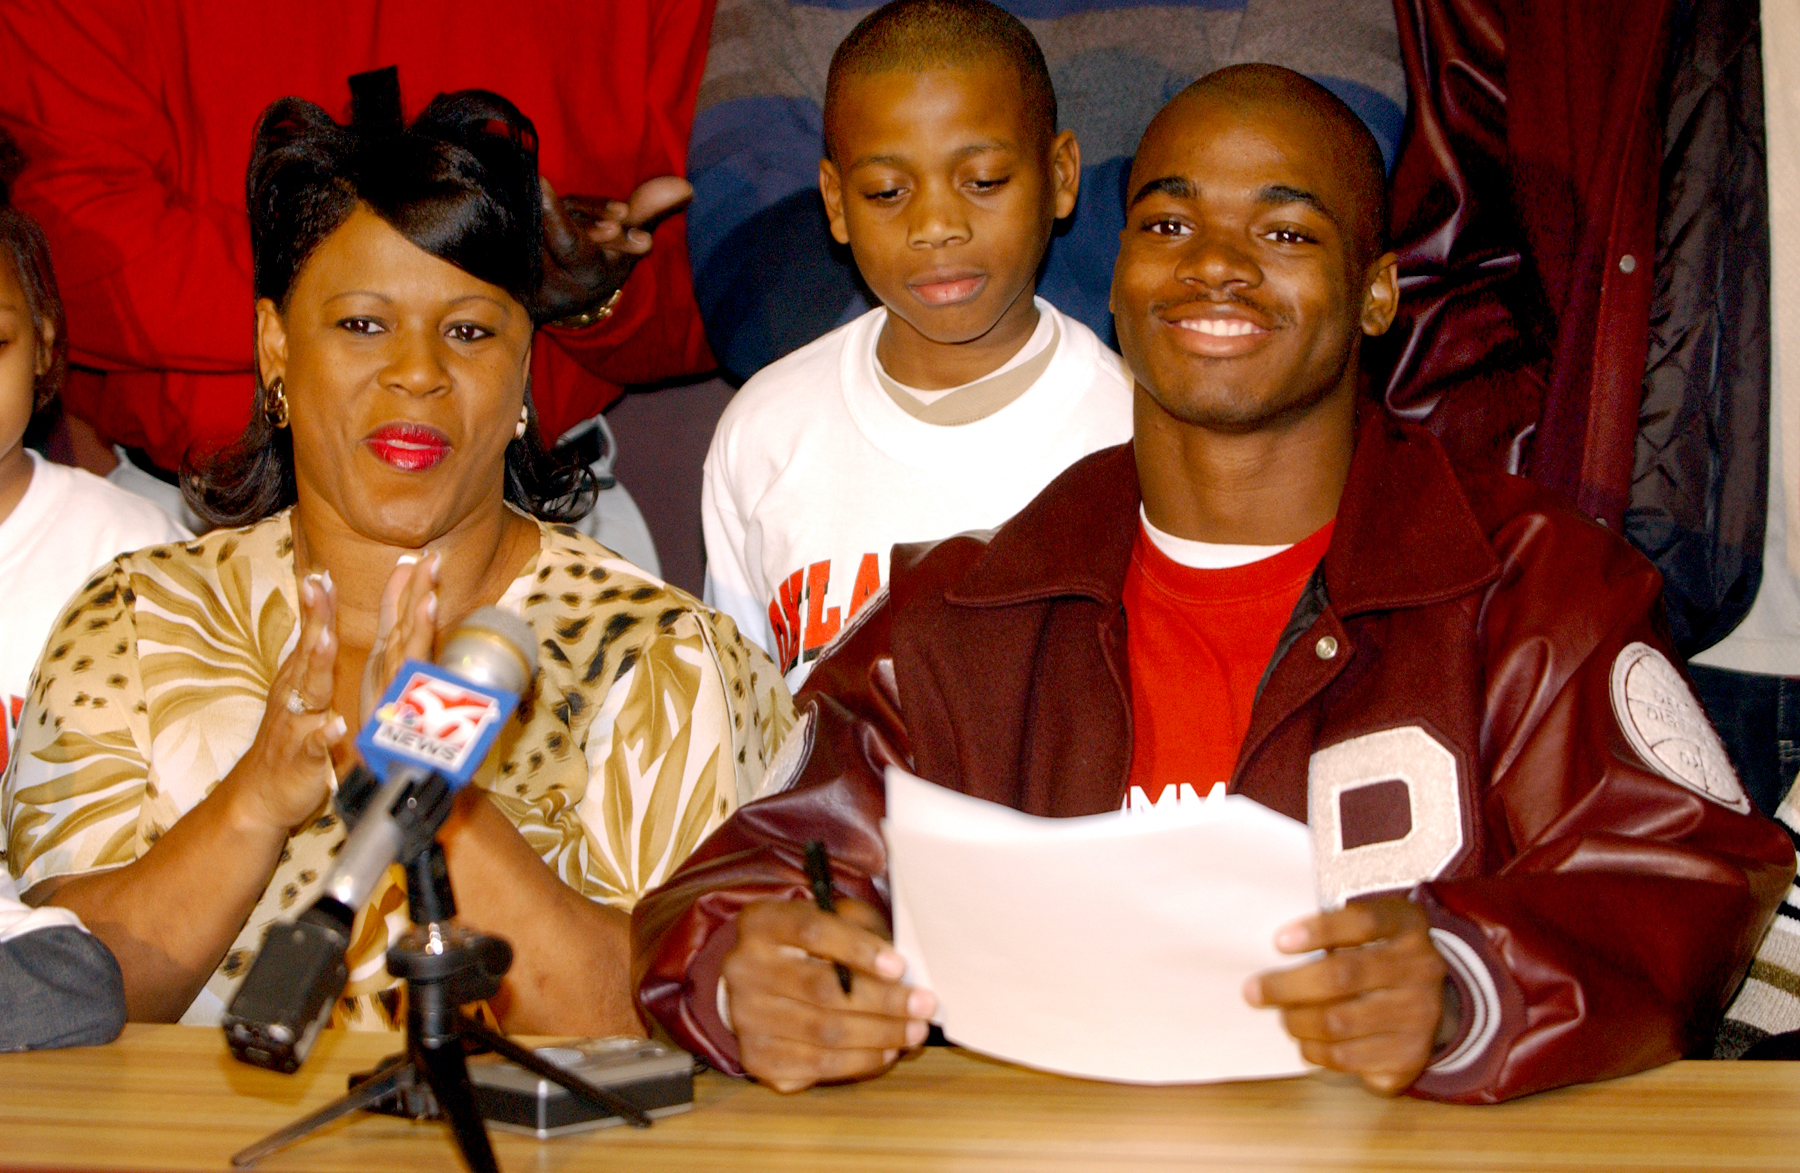 Palestine running back Adrian Peterson, right, smiles after signing a national letter of intent to play football for Oklahoma on Feb. 4, 2004, in Palestine, Texas. At left is his mother Bonita Jackson, and at center is his brother, Jaylon Jackson. (David Branch—Tyler Morning Telegraph/AP)